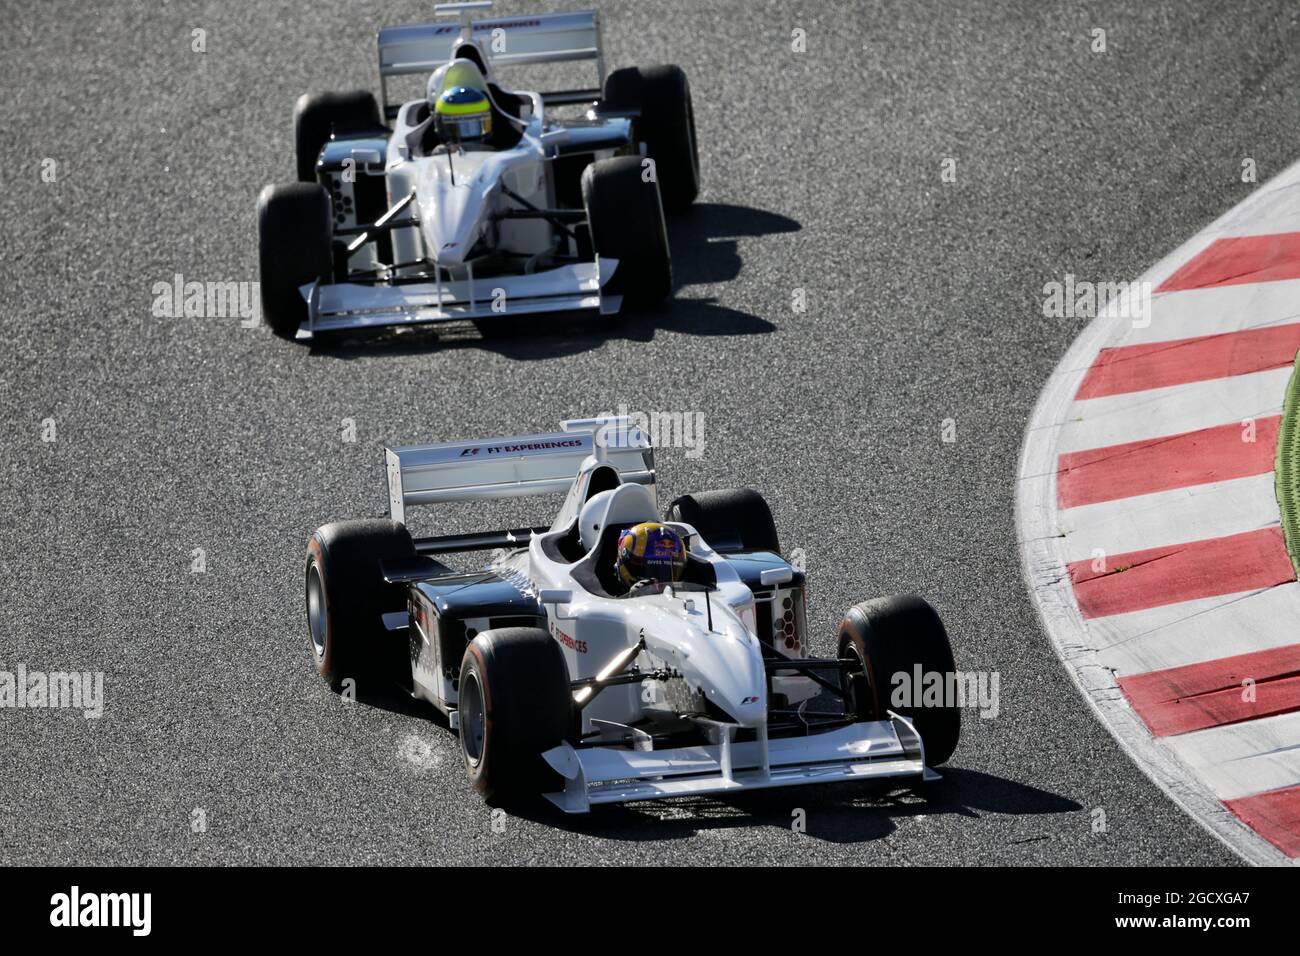 Patrick Friesacher (AUT) and Zsolt Baumgartner (HUN) in Two-Seater F1 Experiences Racing Cars. Spanish Grand Prix, Saturday 13th May 2017. Barcelona, Spain. Stock Photo